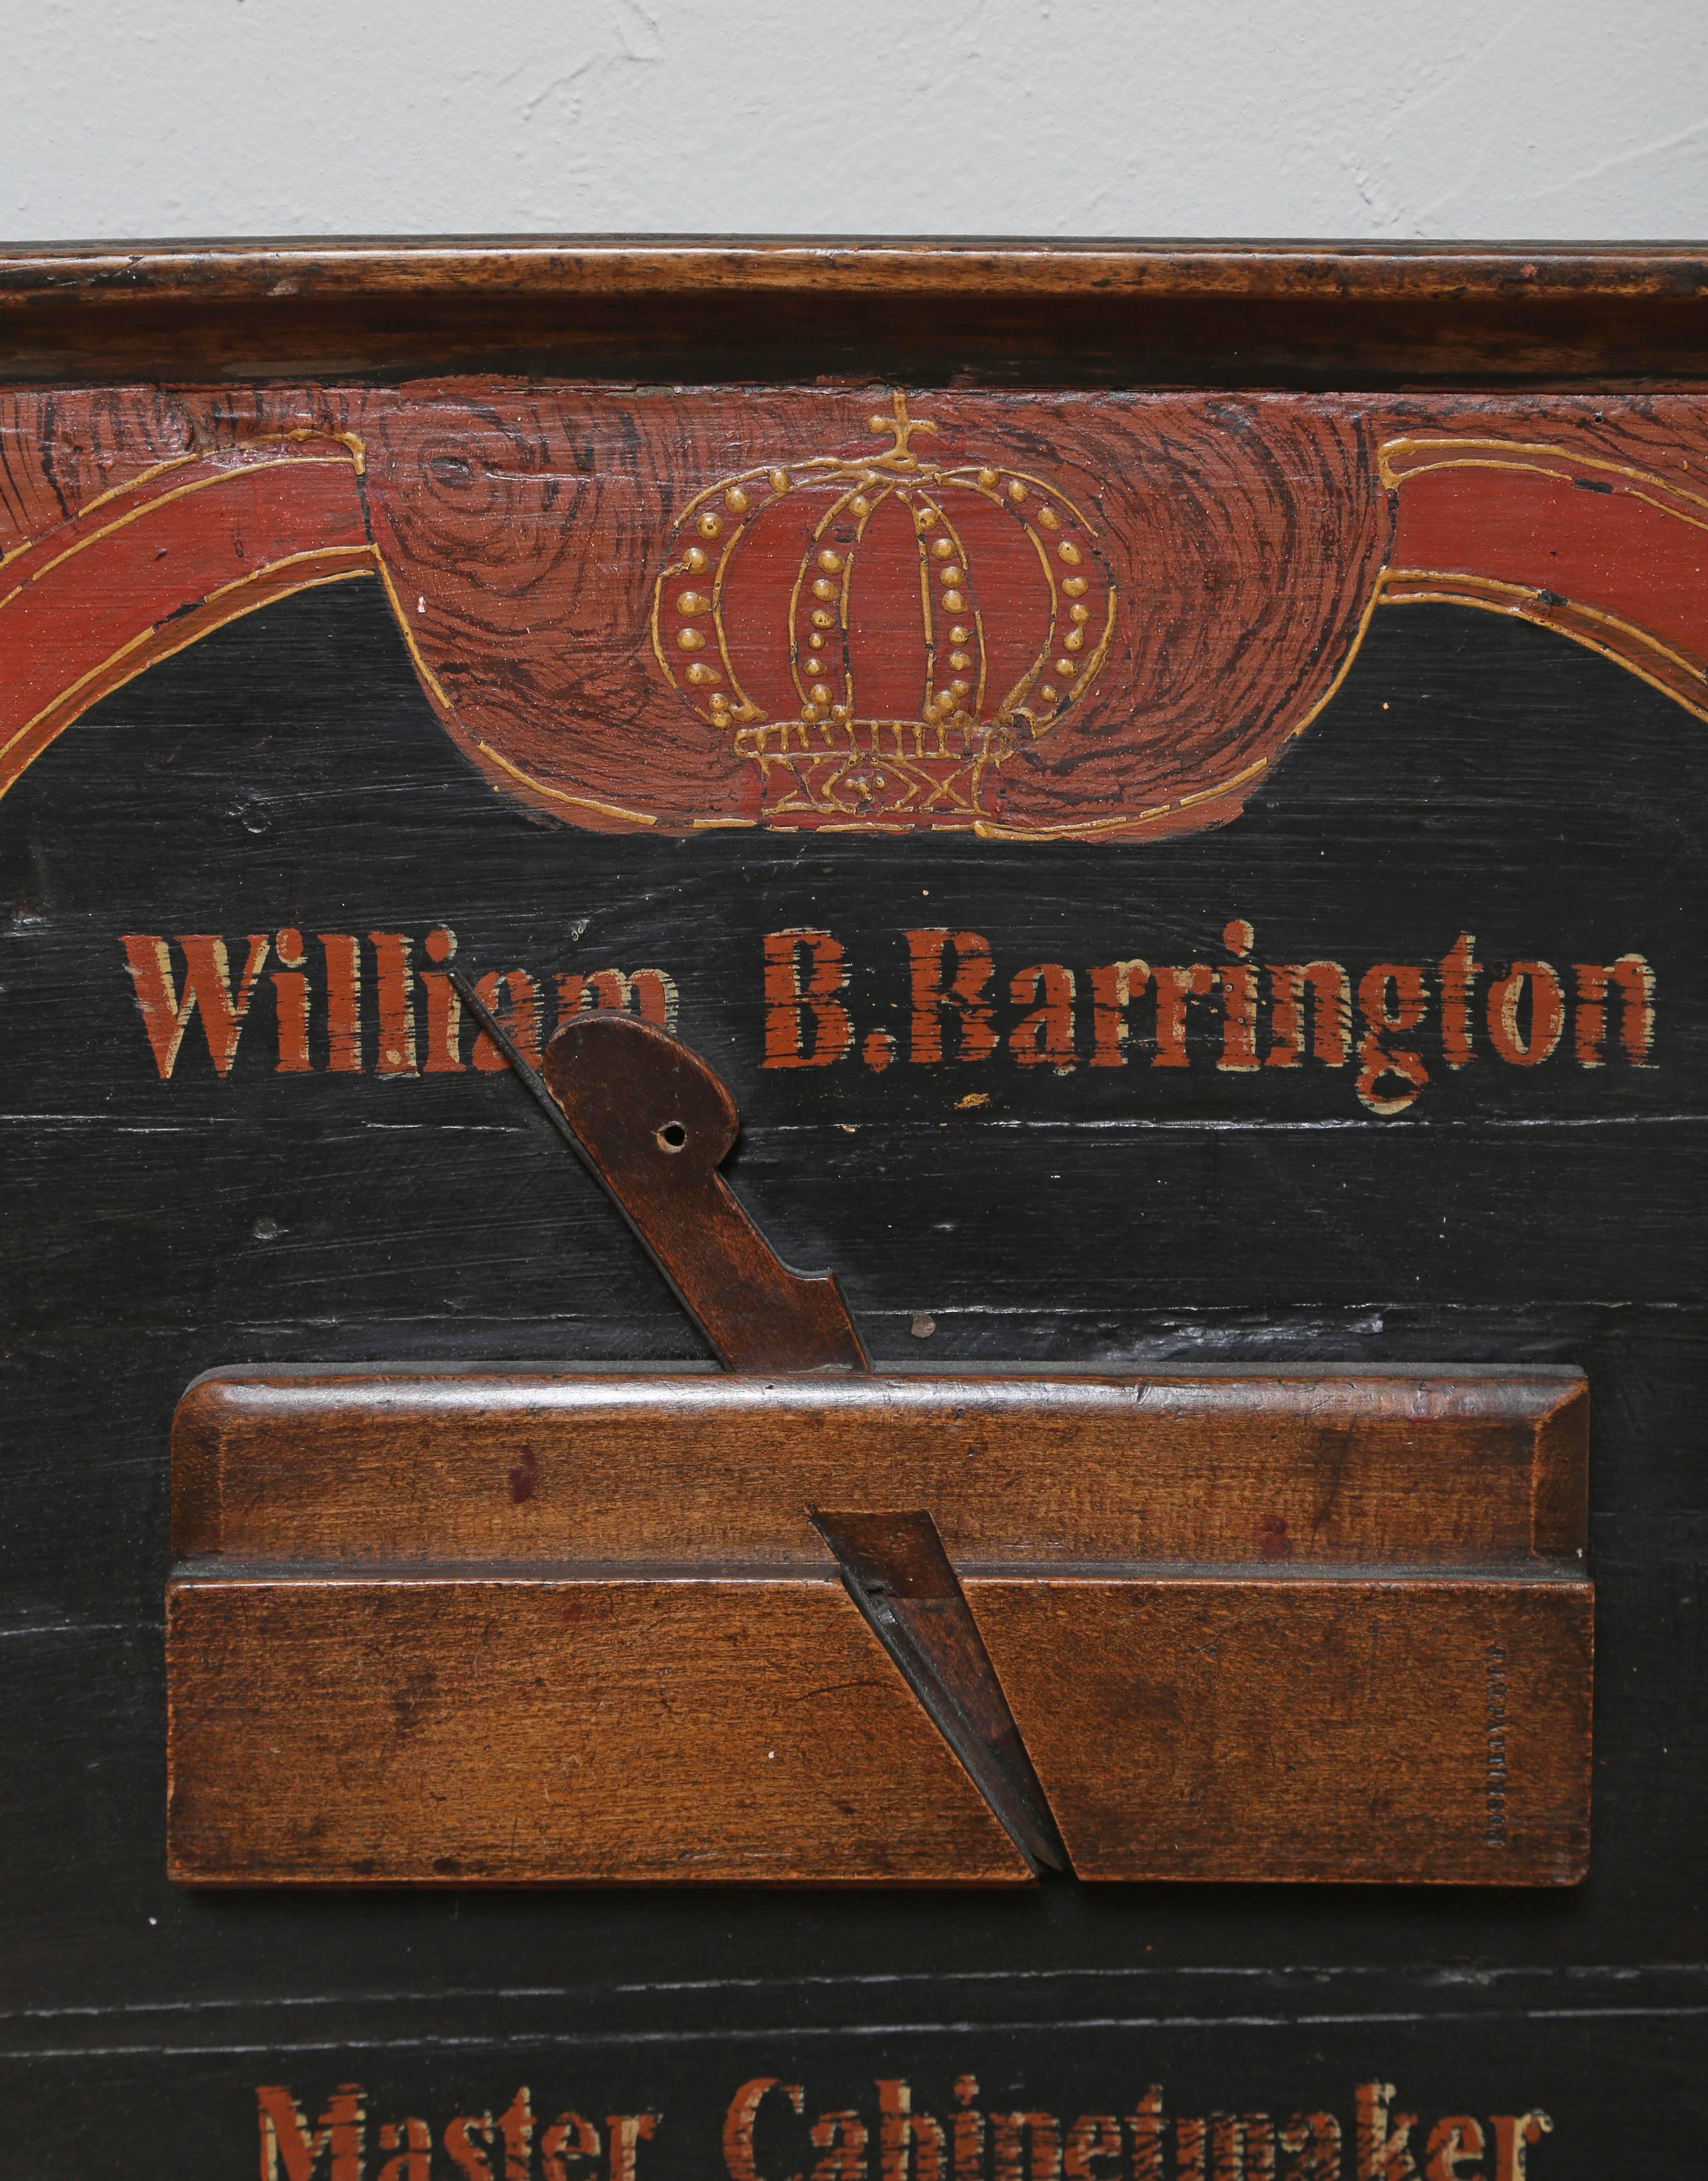 Antique wood hand-painted cabinet maker's sign centered with an antique wood plane and the name William B. Barrington.